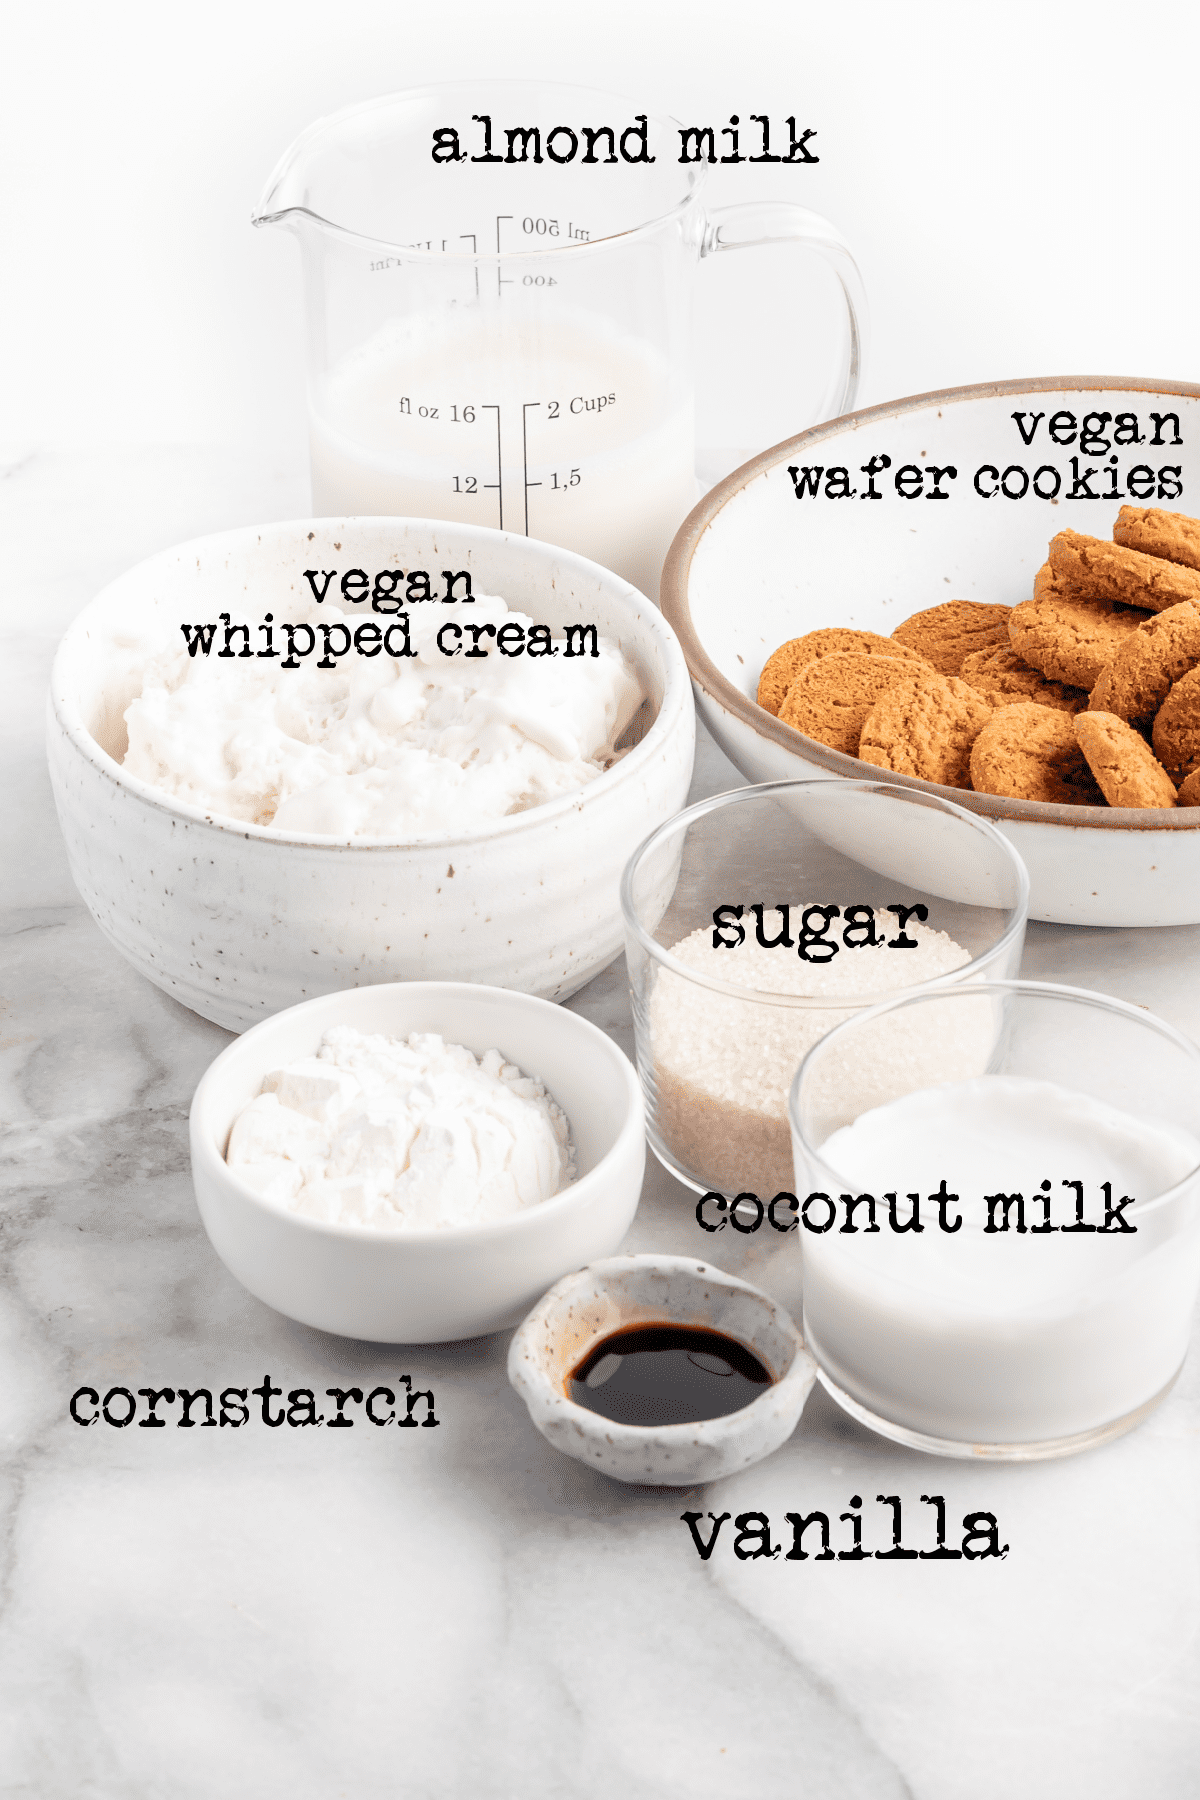 image of all ingredients needed to make vegan banana pudding, labeled with text overlays.